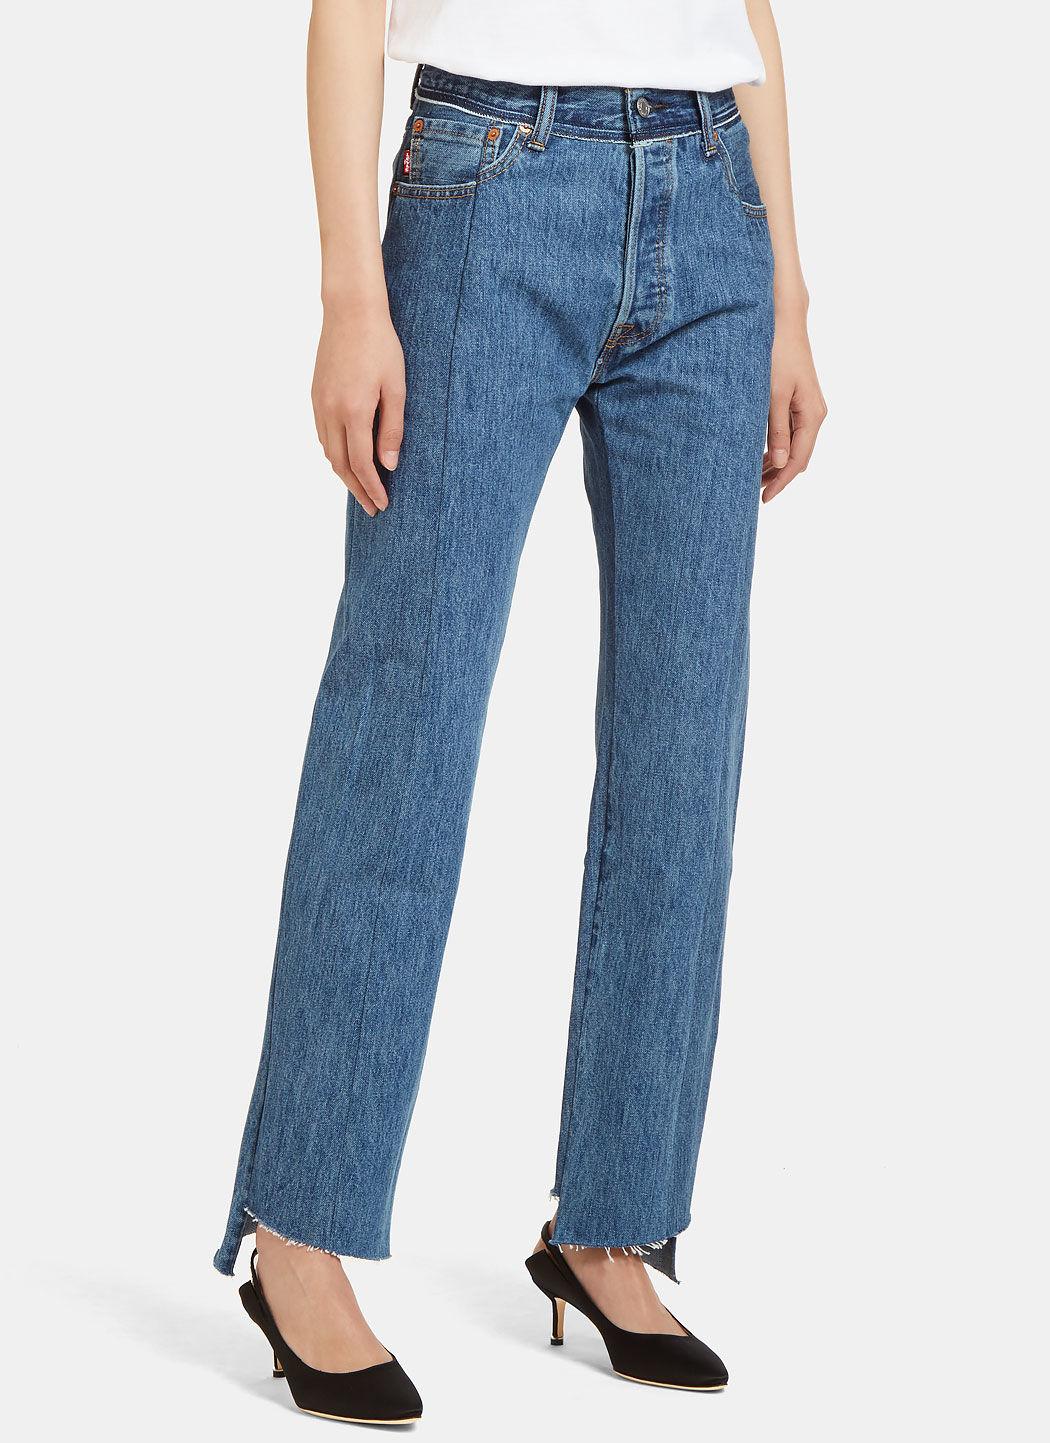 Vetements Levi's Reworked High-waisted Jeans In Blue | ModeSens